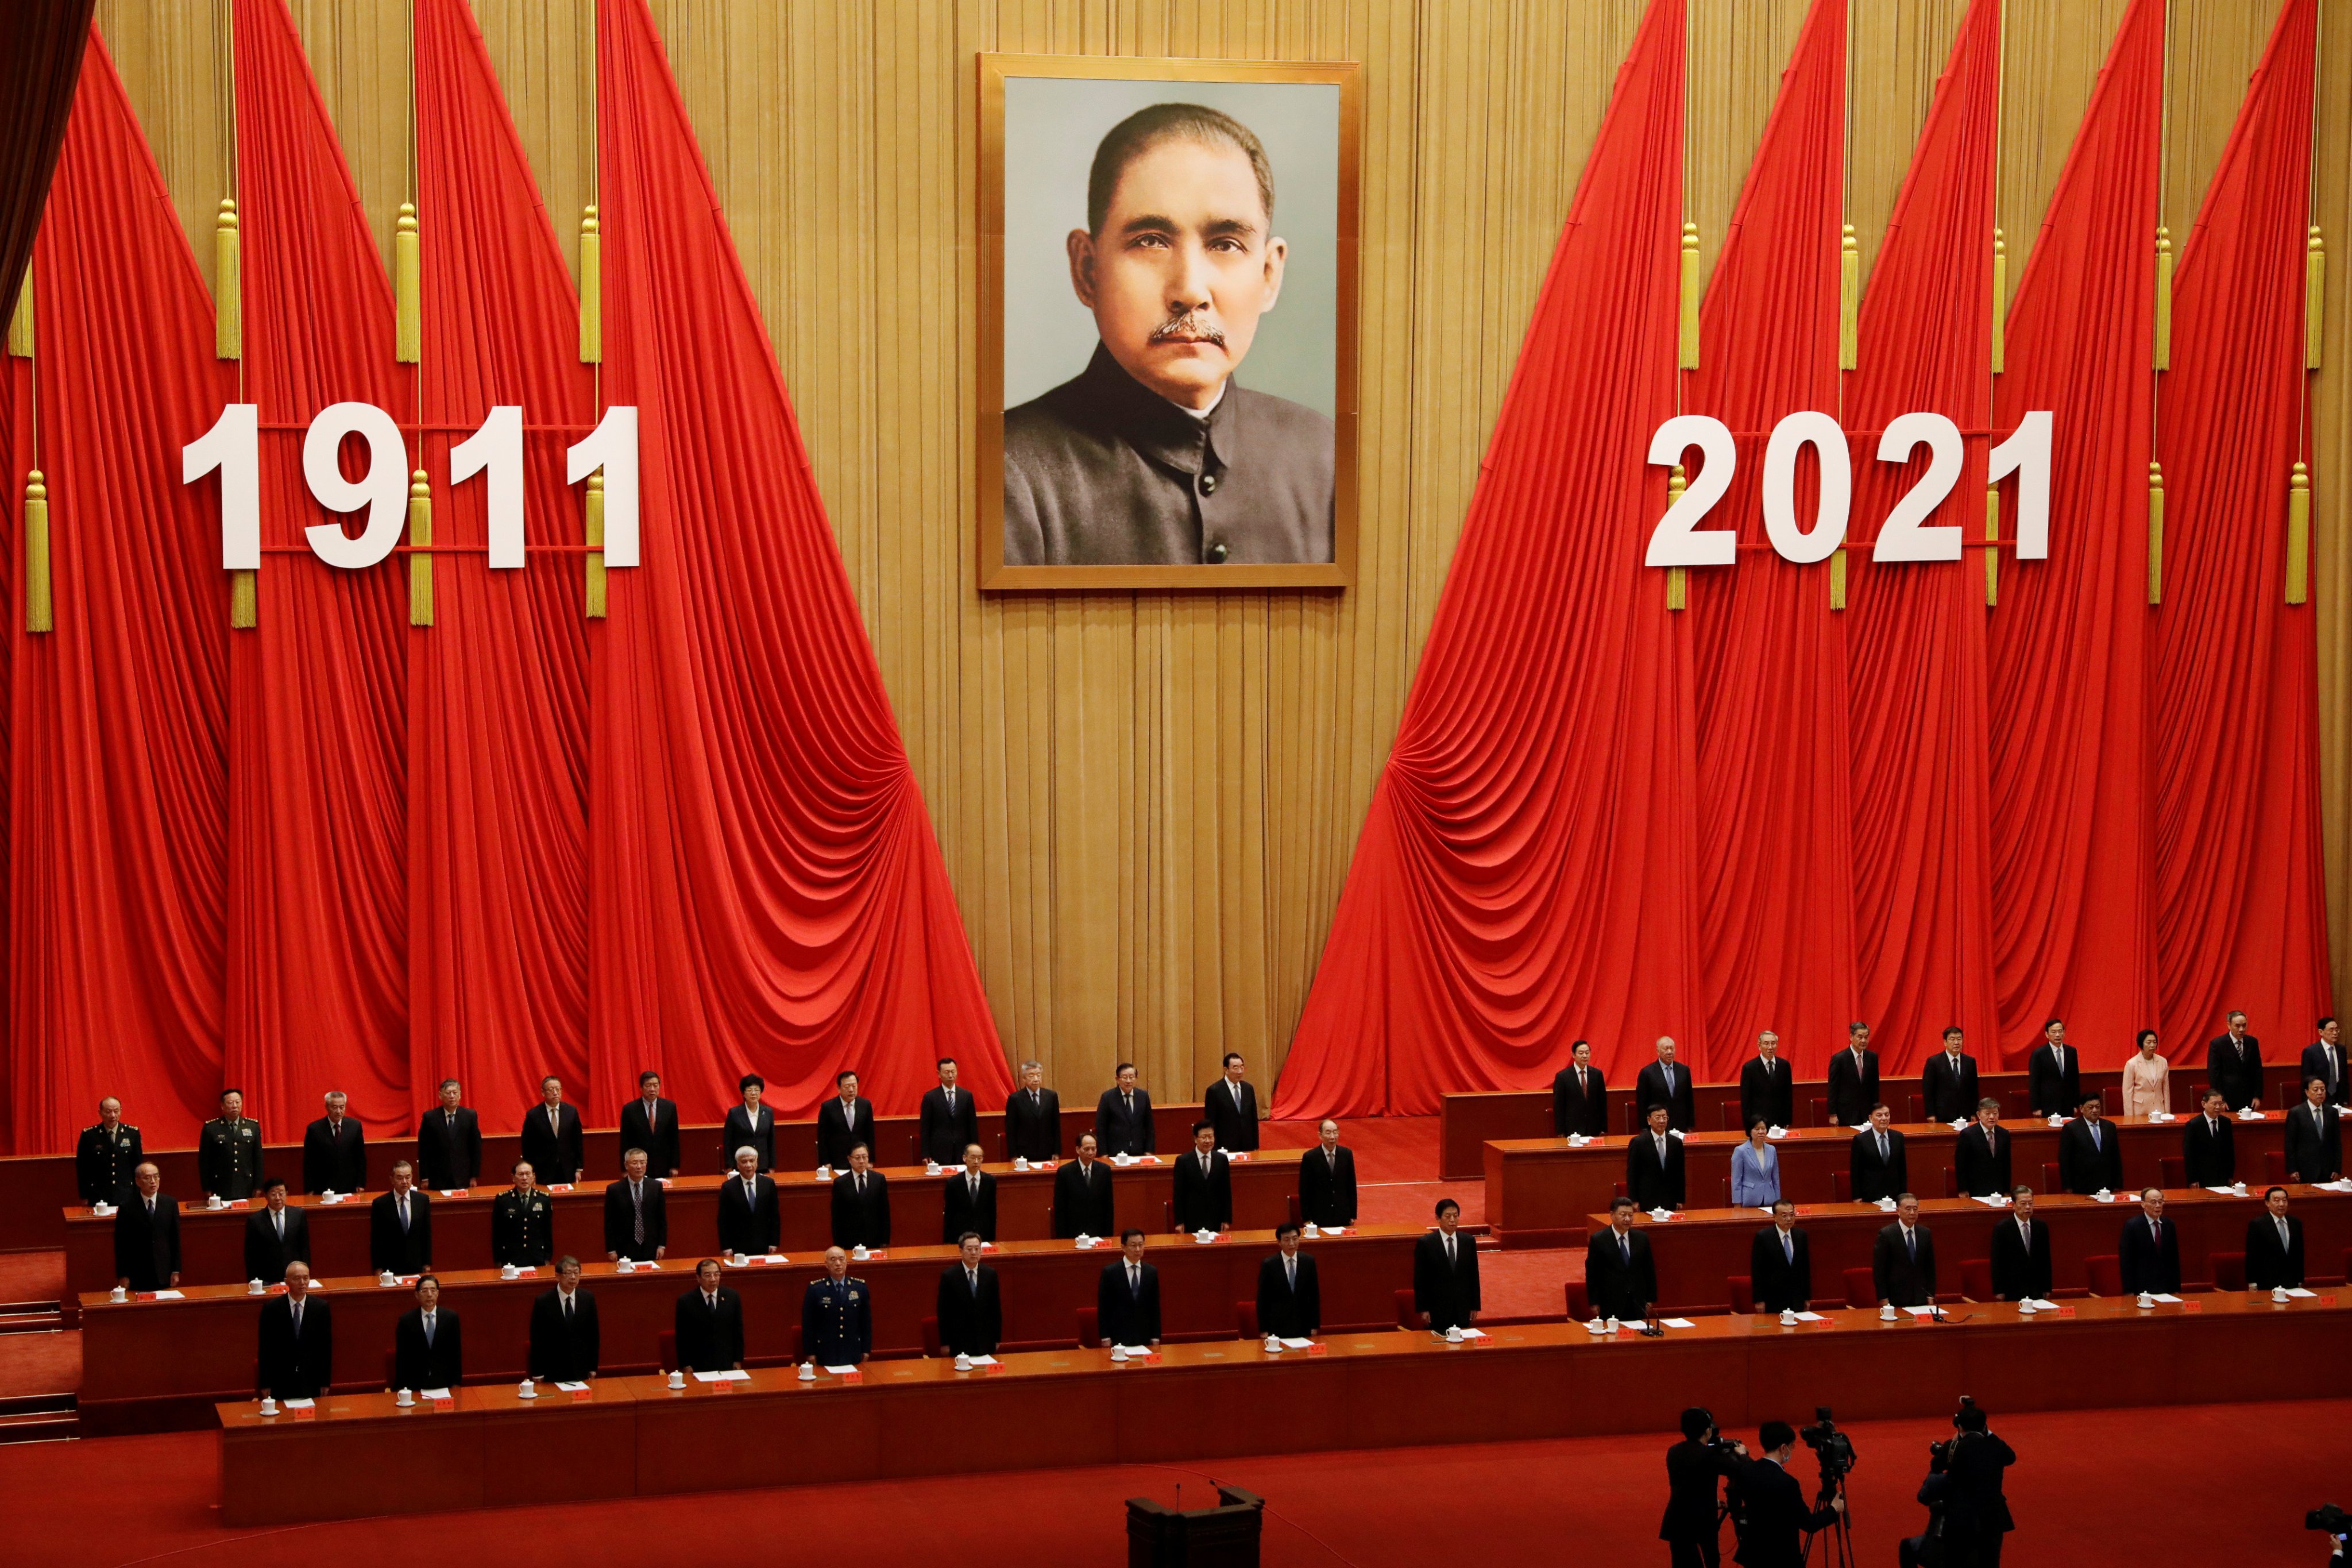 Chinese President Xi Jinping and other leaders stand under a giant portrait of Sun Yat-sen at a meeting commemorating the 110th anniversary of the Xinhai Revolution, at the Great Hall of the People in Beijing, on October 9, 2021. In terms of China’s foreign relations, Sun’s idea that all nations are equal resonates with modern China’s “five principles of peaceful coexistence” and “a world community with a shared future”. Photo: Reuters